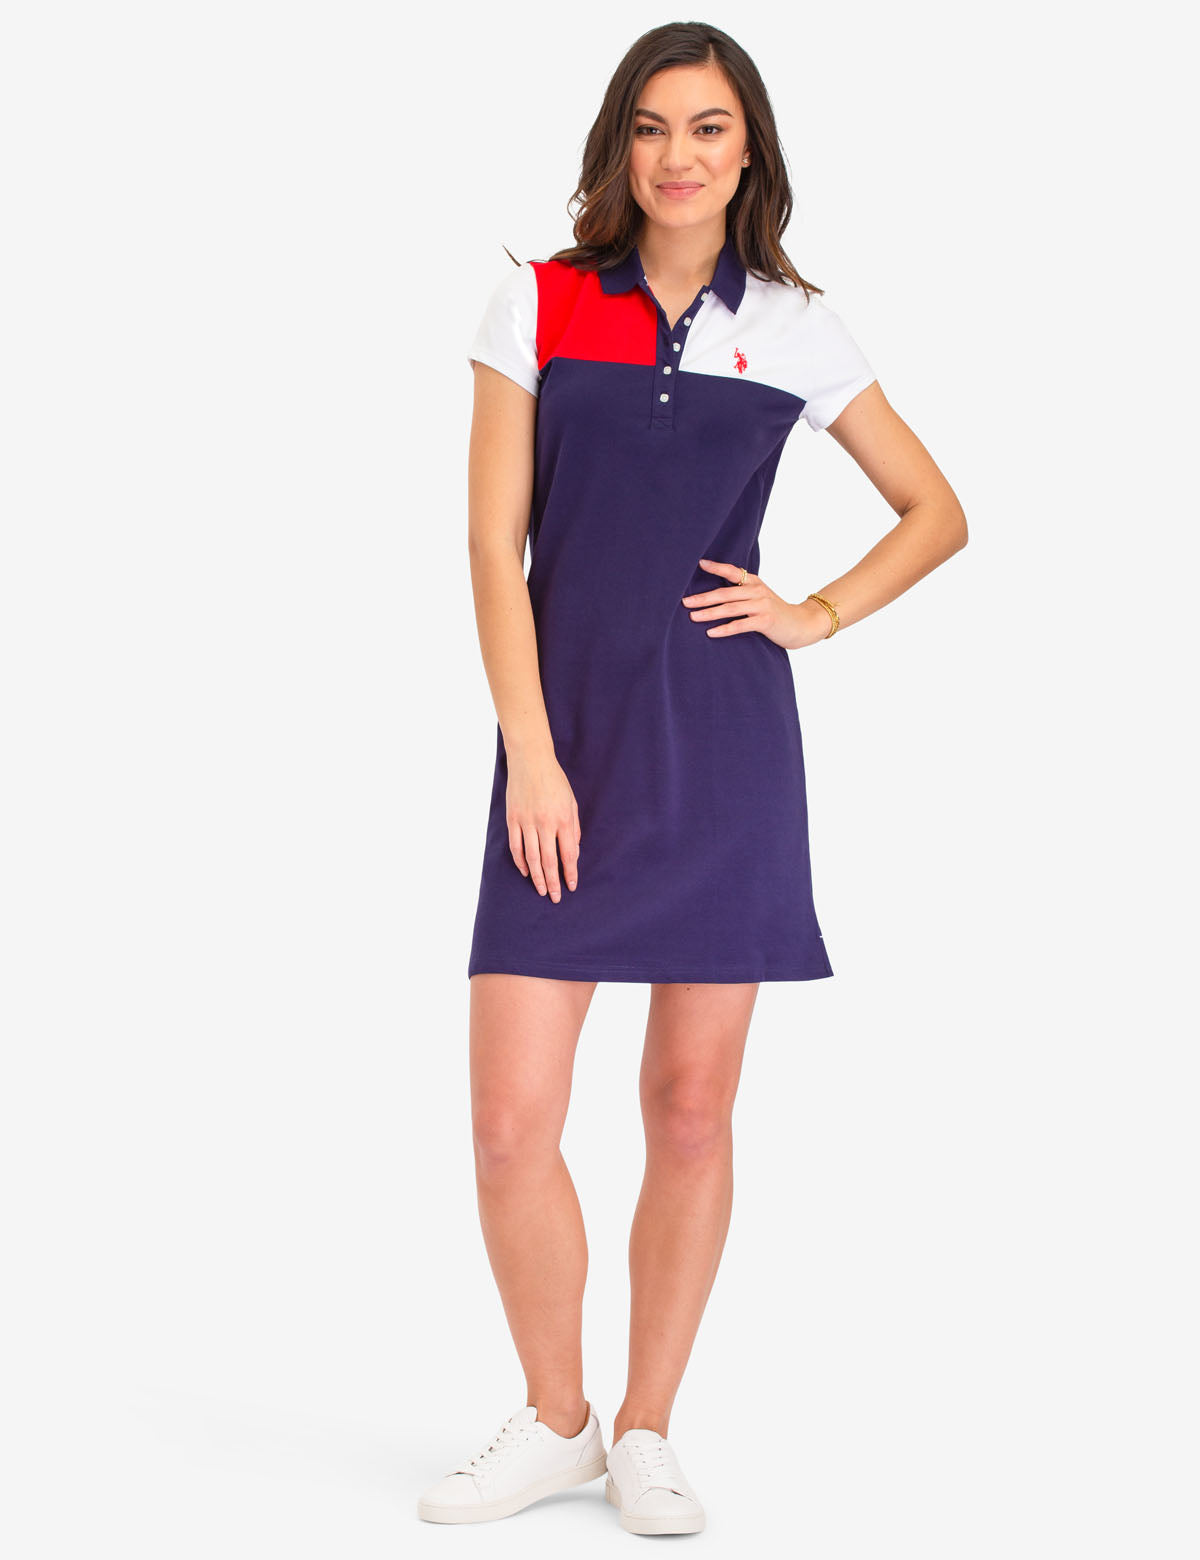 polo dress for ladies